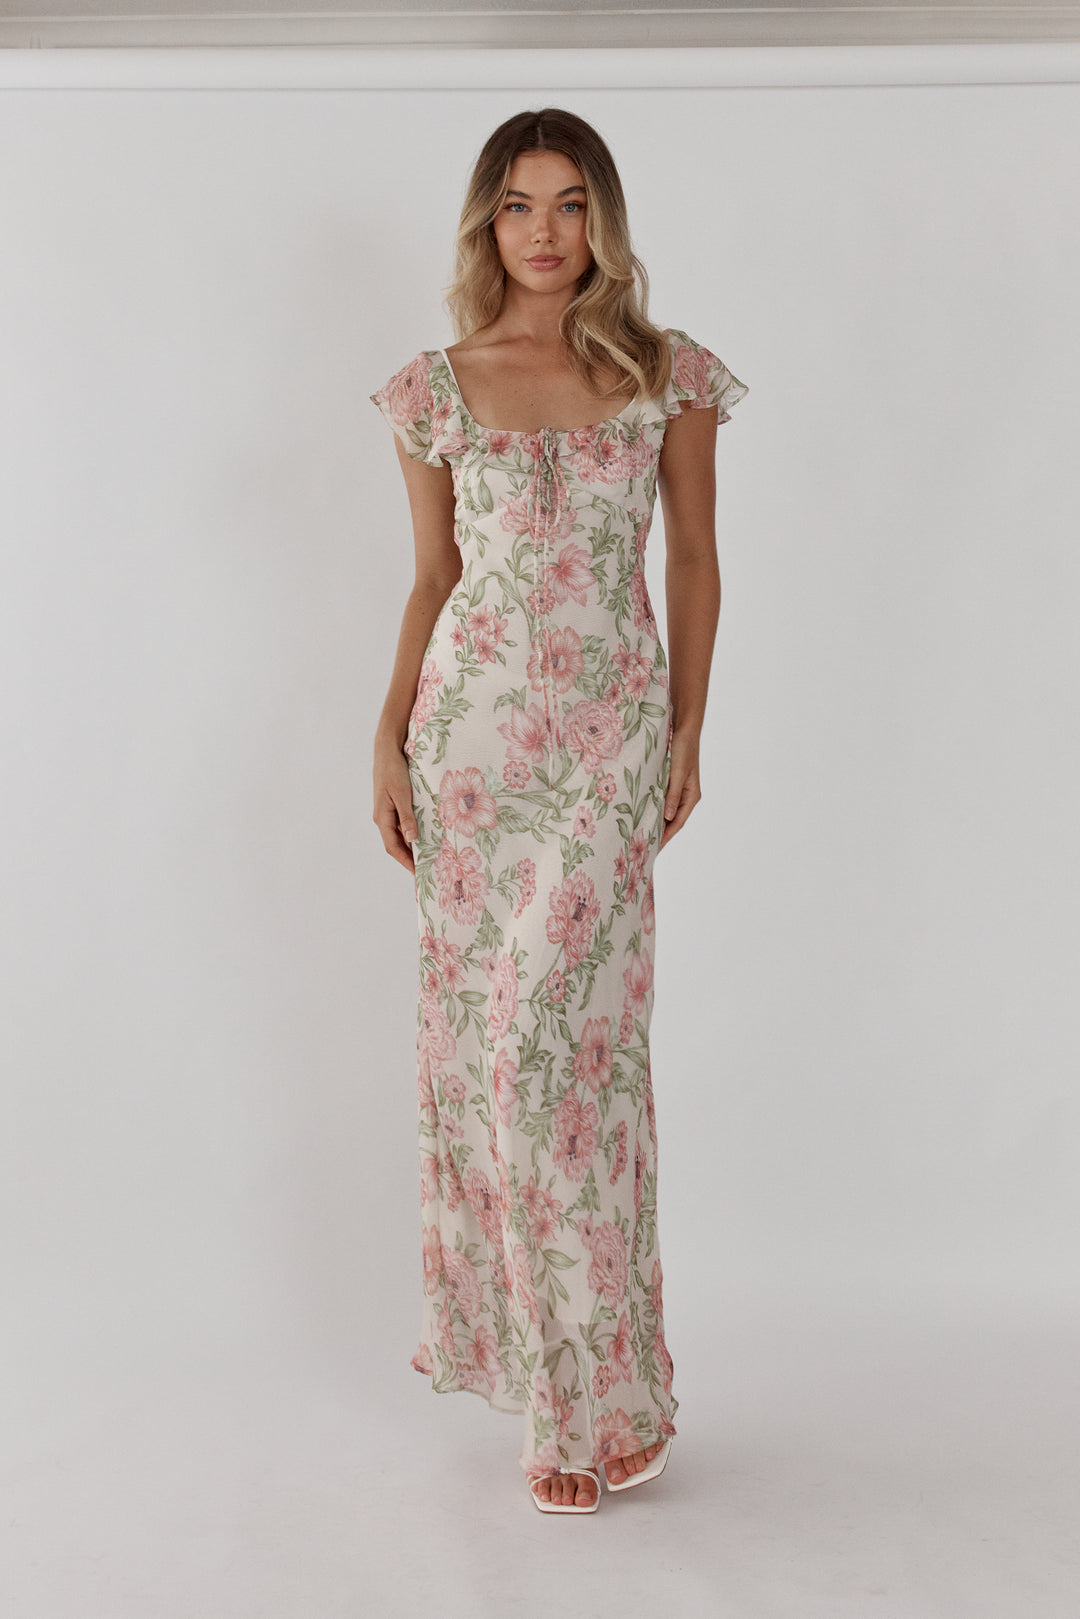 Floral silk maxi dress australian made in a vintage floral print